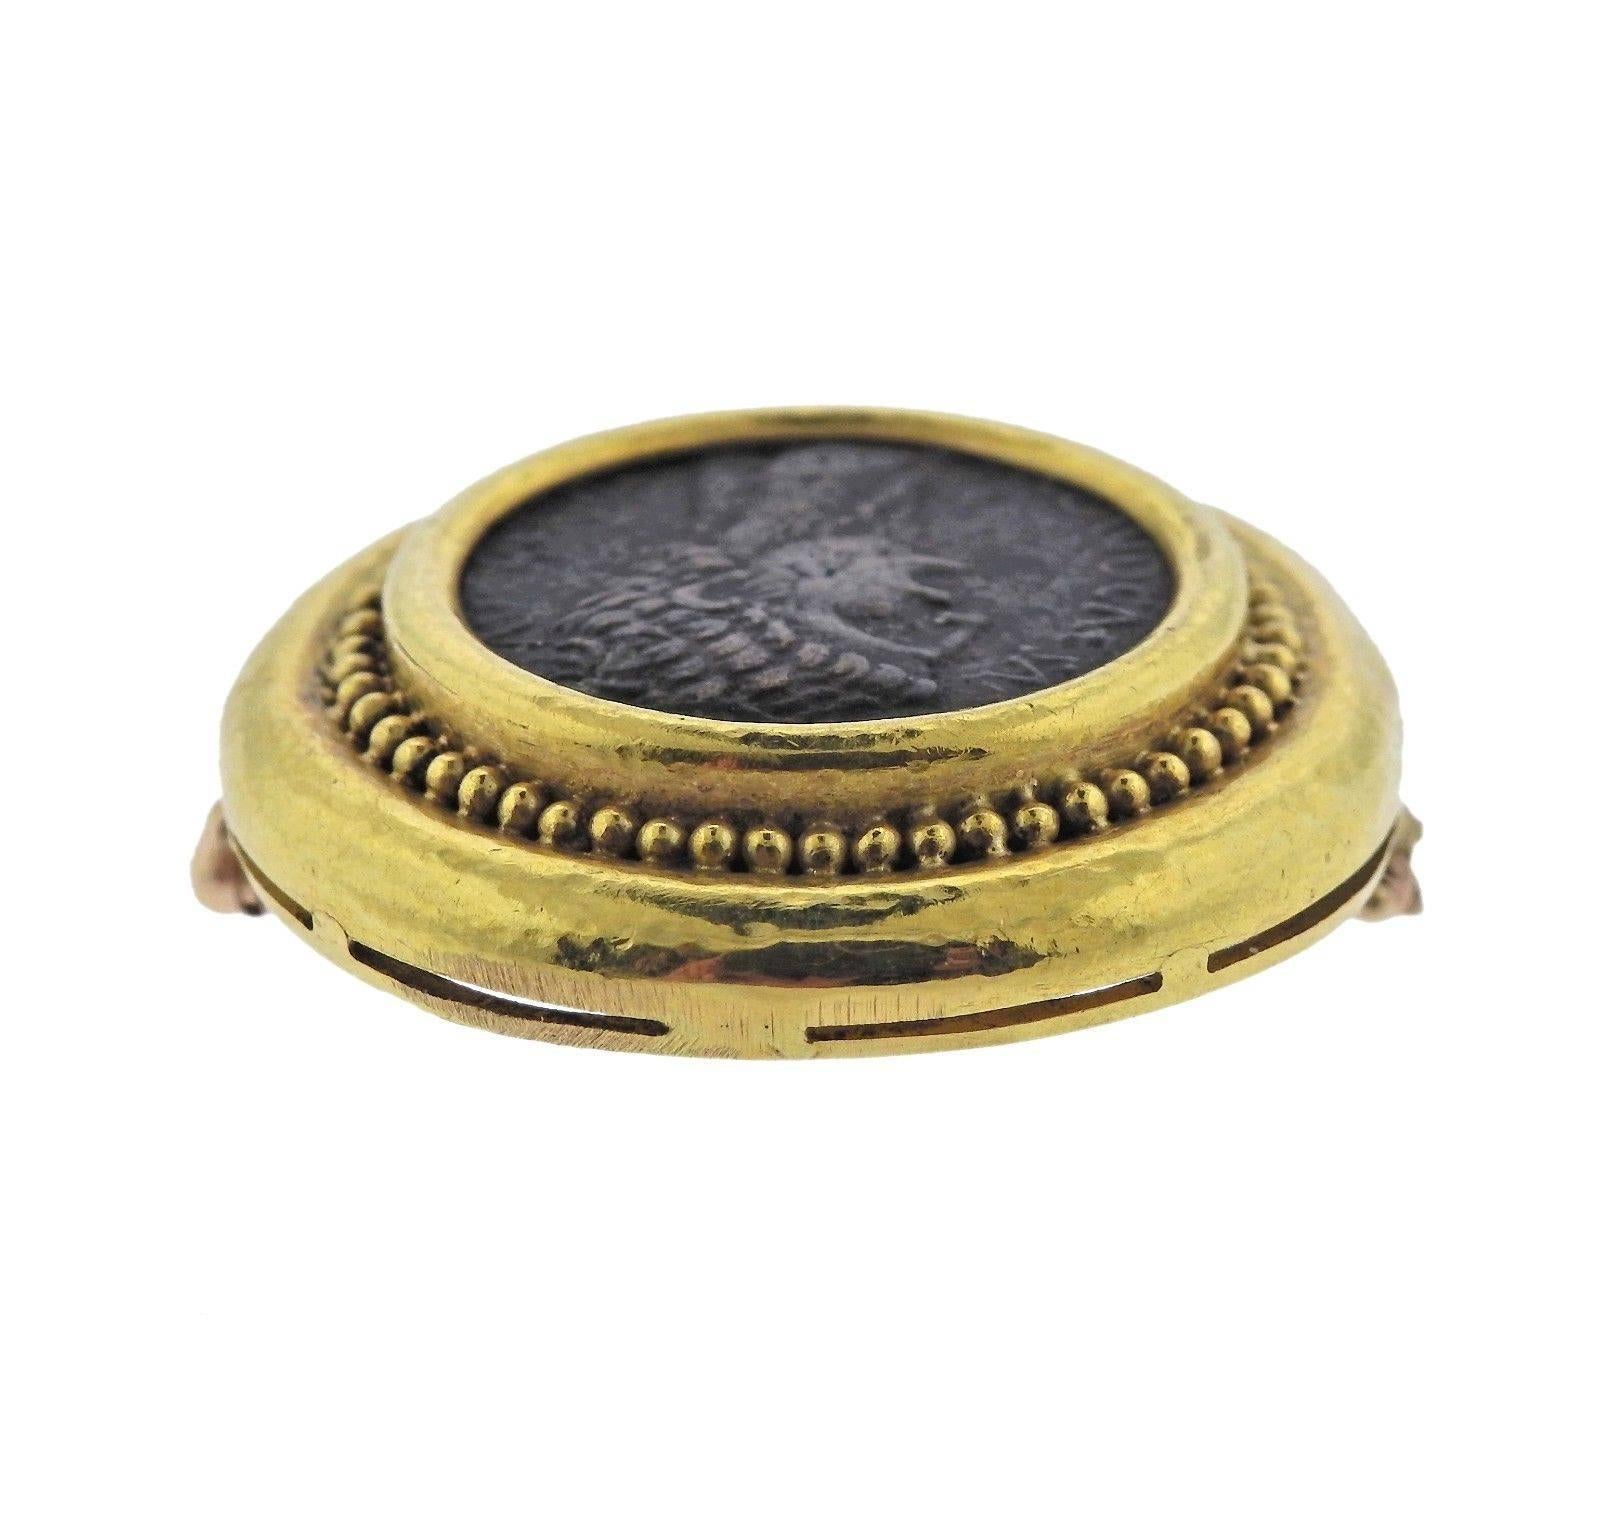 An 18k gold brooch set with an ancient bronze coin.  Crafted by Elizabeth Locke, the brooch measures 35mm in diameter and weighs 30.9 grams.  Marked: Maker's Mark, 18k.